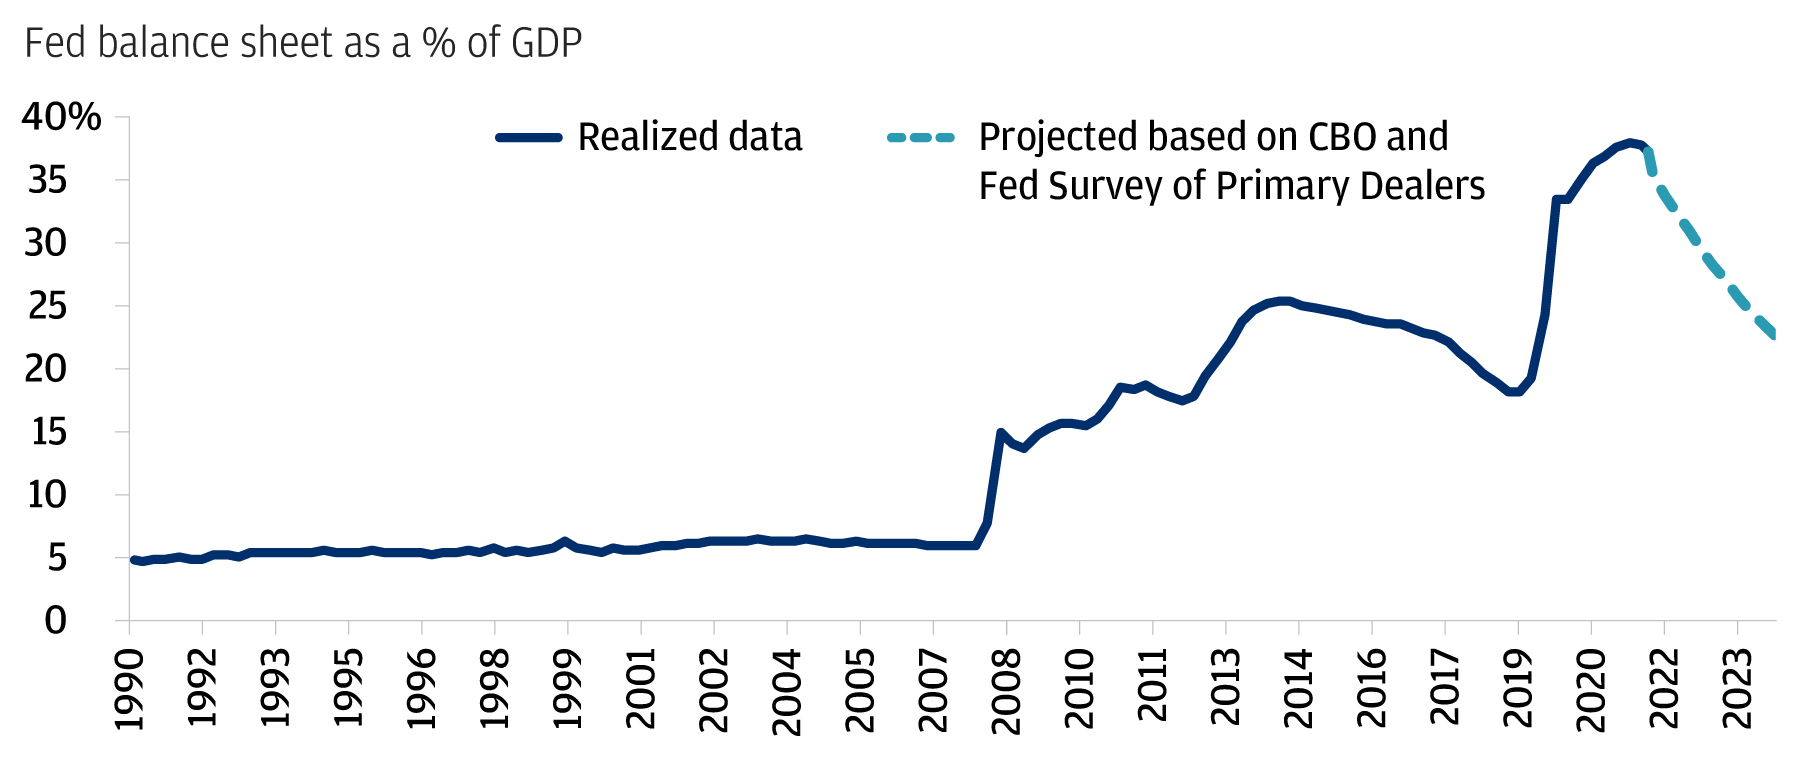 This chart shows the Fed balance sheet as a percentage of United States GDP from 1990 to 2022.